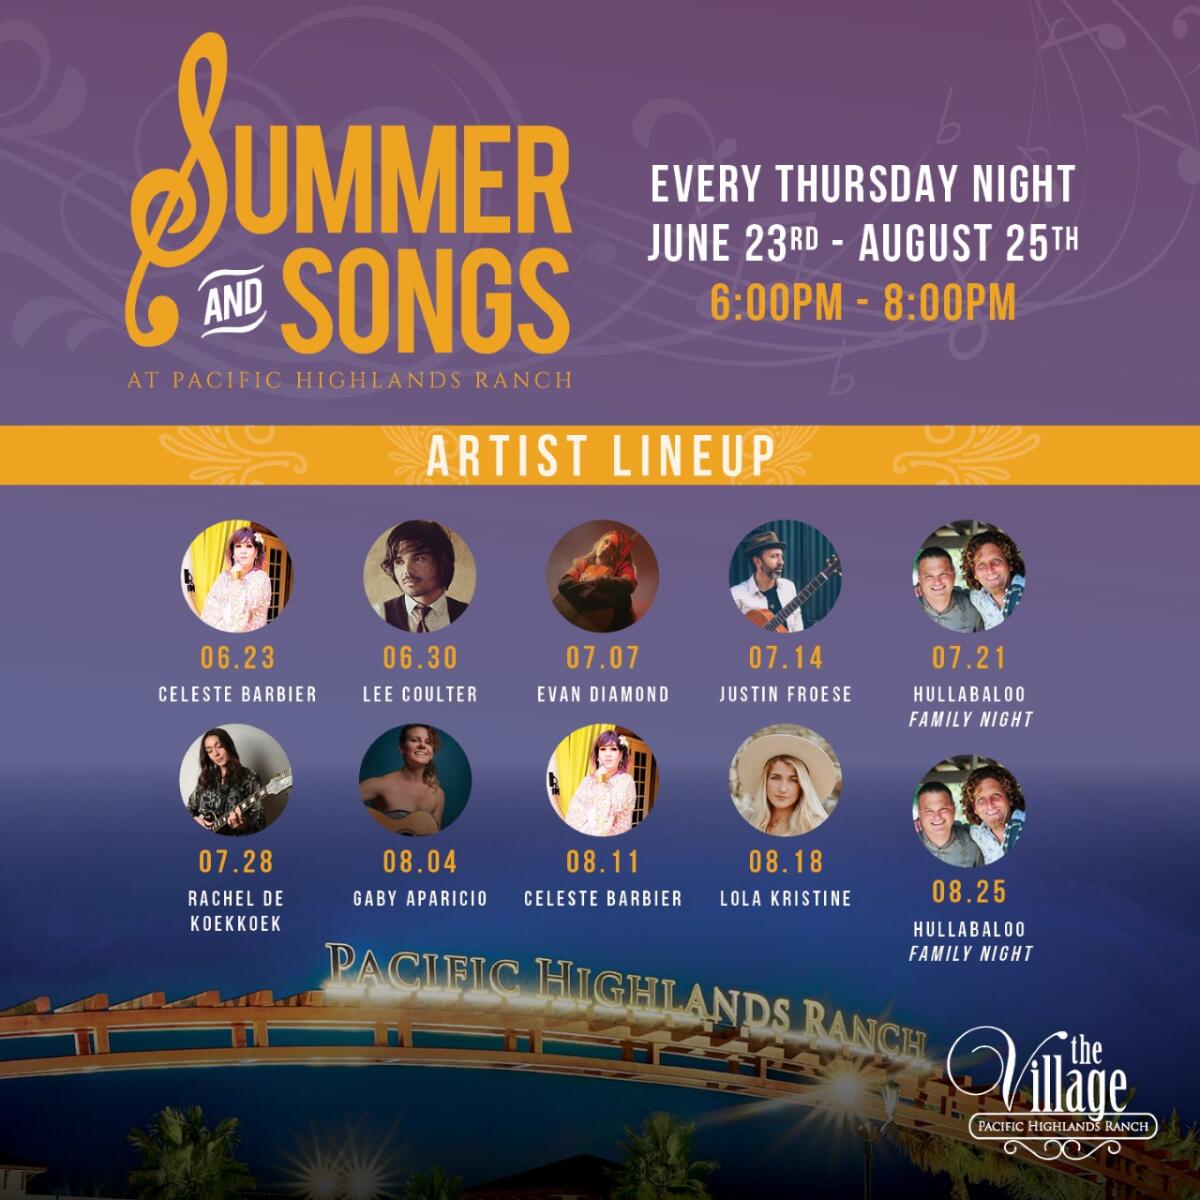 The Summer and Songs lineup.